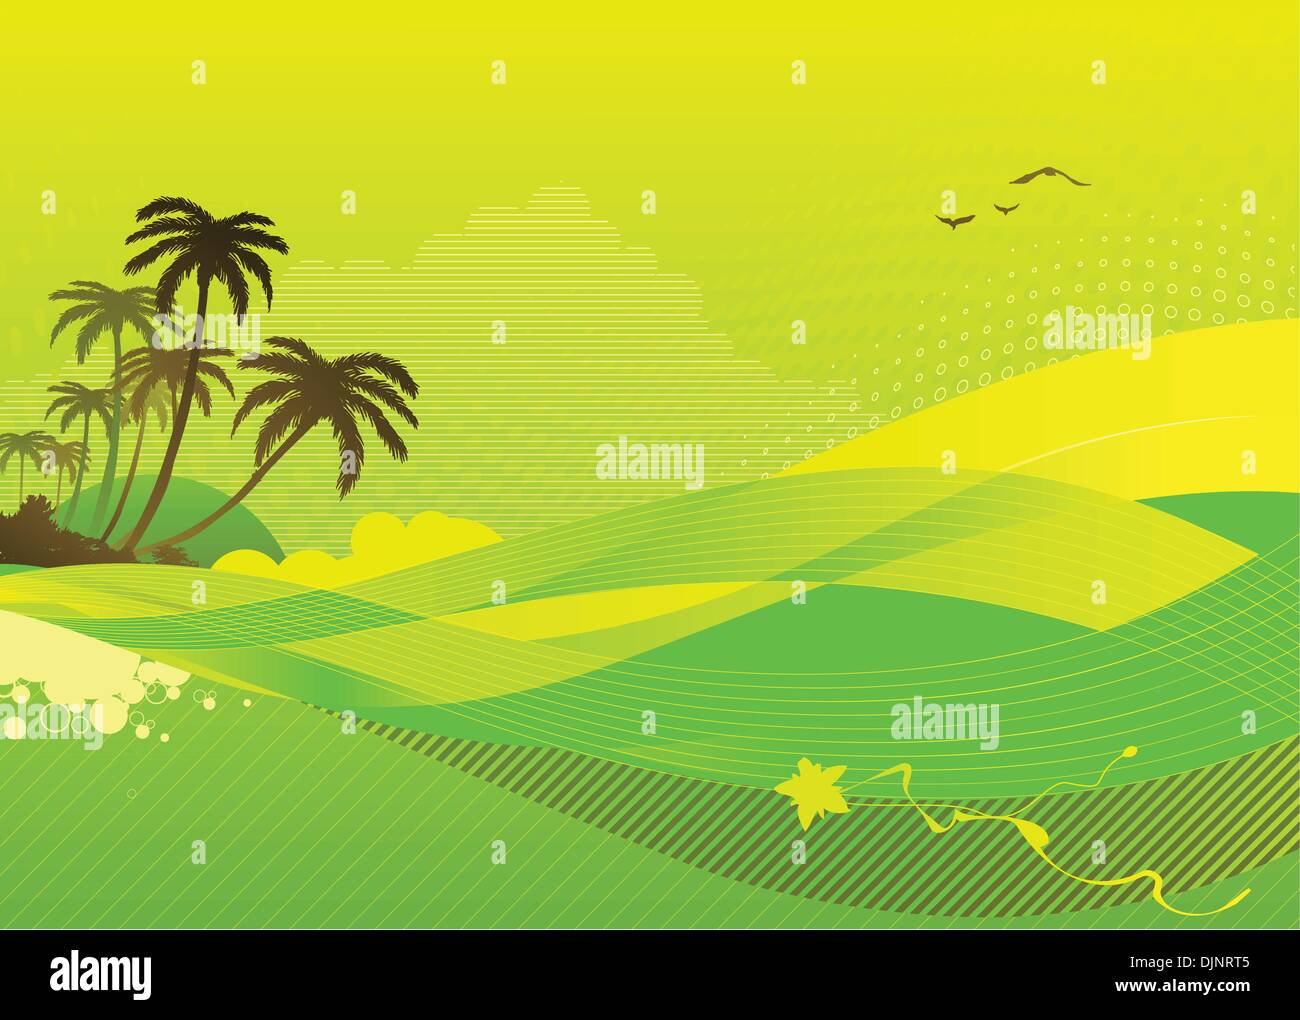 Palm tree vector background Stock Vector